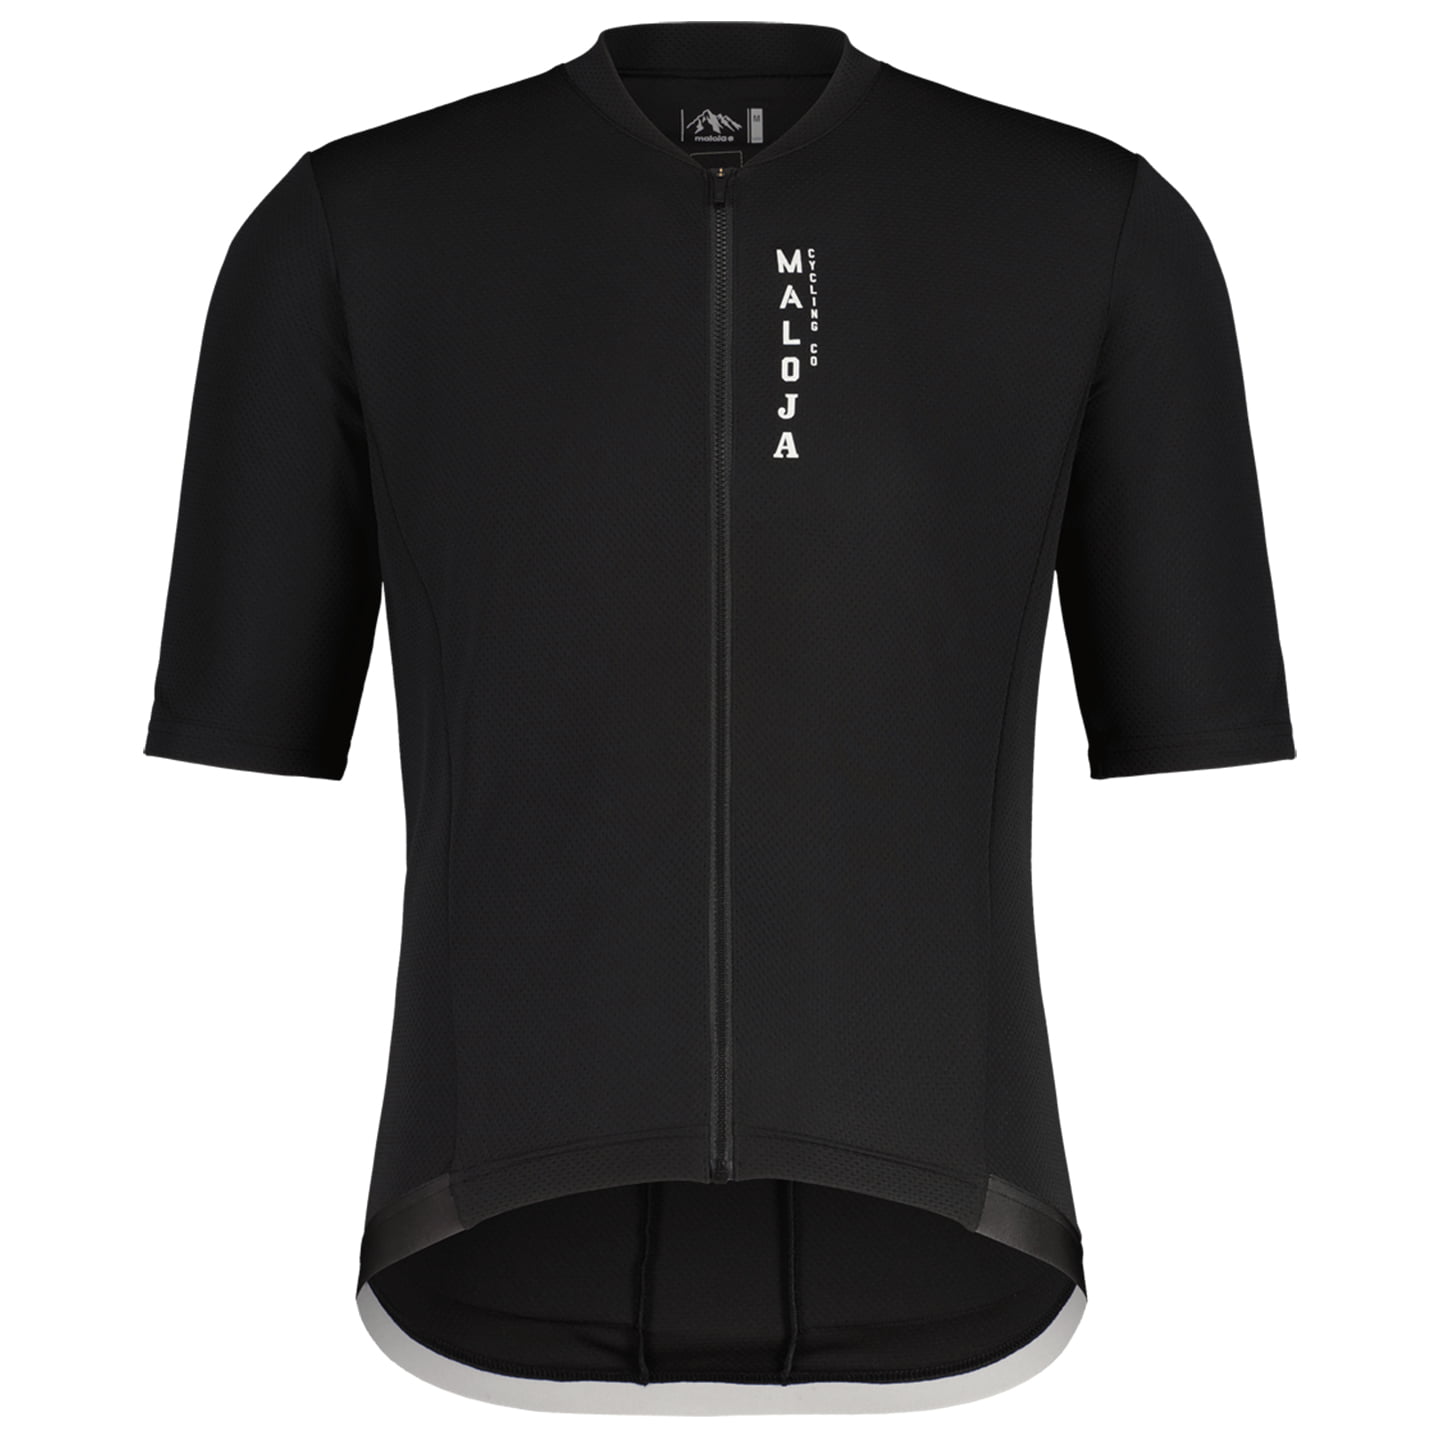 MALOJA ChivayM. Short Sleeve Jersey Short Sleeve Jersey, for men, size XL, Cycling jersey, Cycle clothing